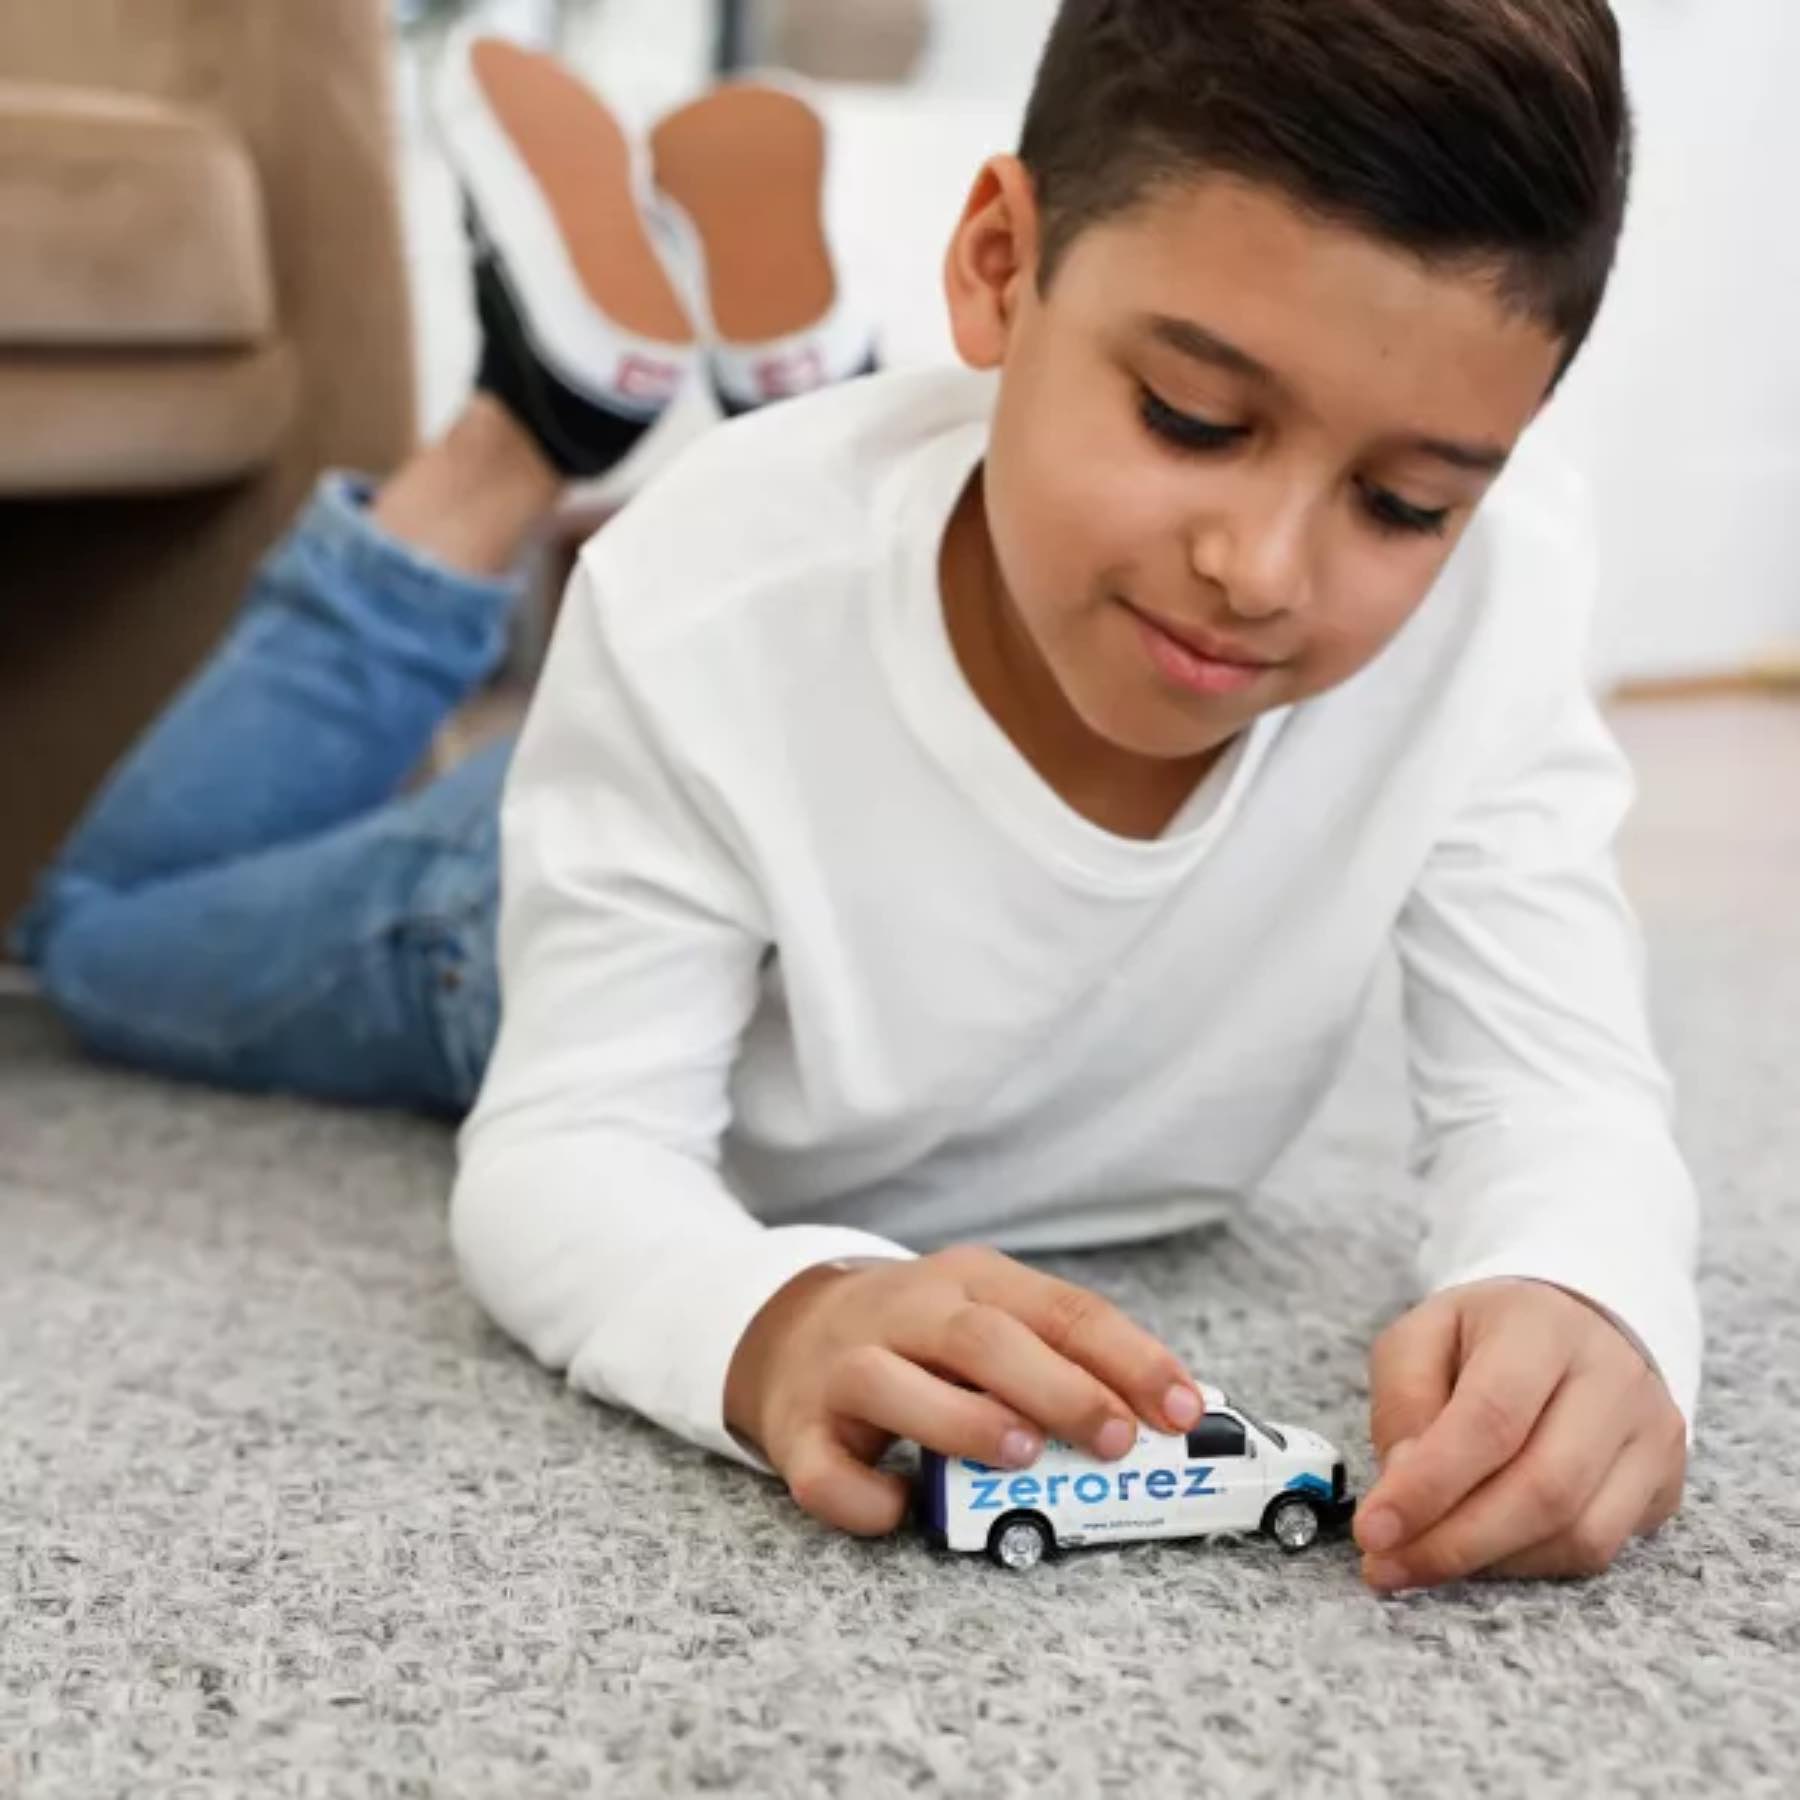 A child playing with a toy Zerorez van on soft carpet.